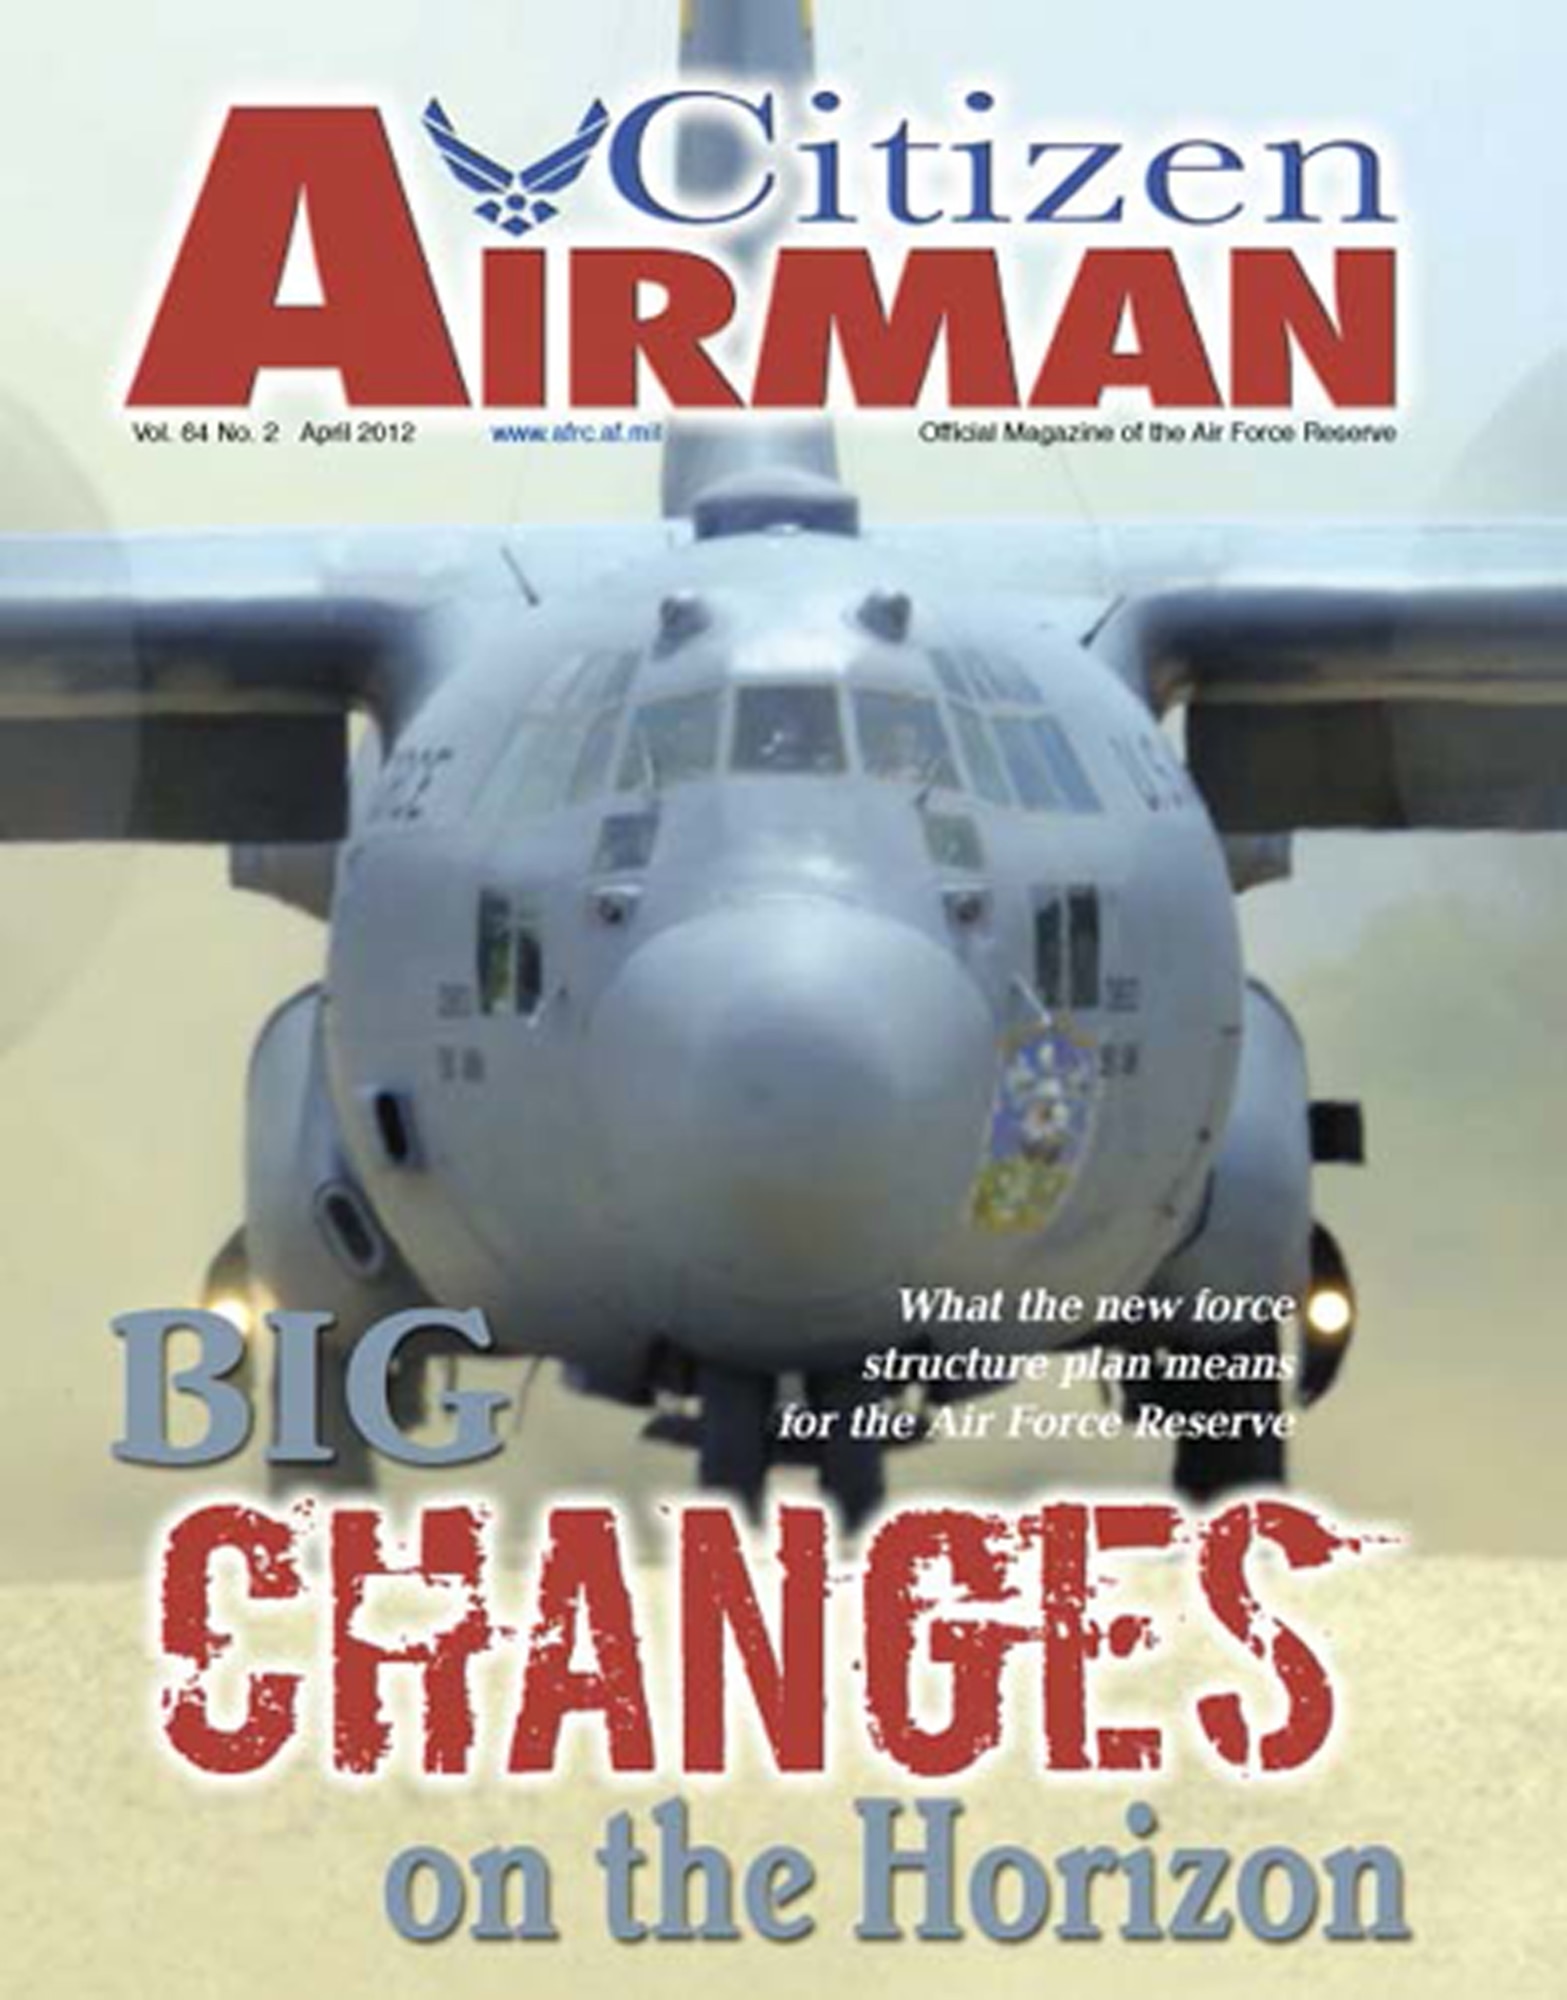 The April issue of Citizen Airman is now available at www.citamn.afrc.af.mil. The April issue features a summary of the personnel and aircraft changes planned for the command under the Air Force's recent force structure announcements. Also, the issue includes feature stories on the command's first sergeants, a need for reservists to serve as military training instructors, a new web page that helps employees stay informed as they transition through their career, the two-week Reserve Components National Security Course and Tricare benefits available to meet health-care needs throughout your Reserve career. (U.S. Air Force graphic/Bo Joyner)